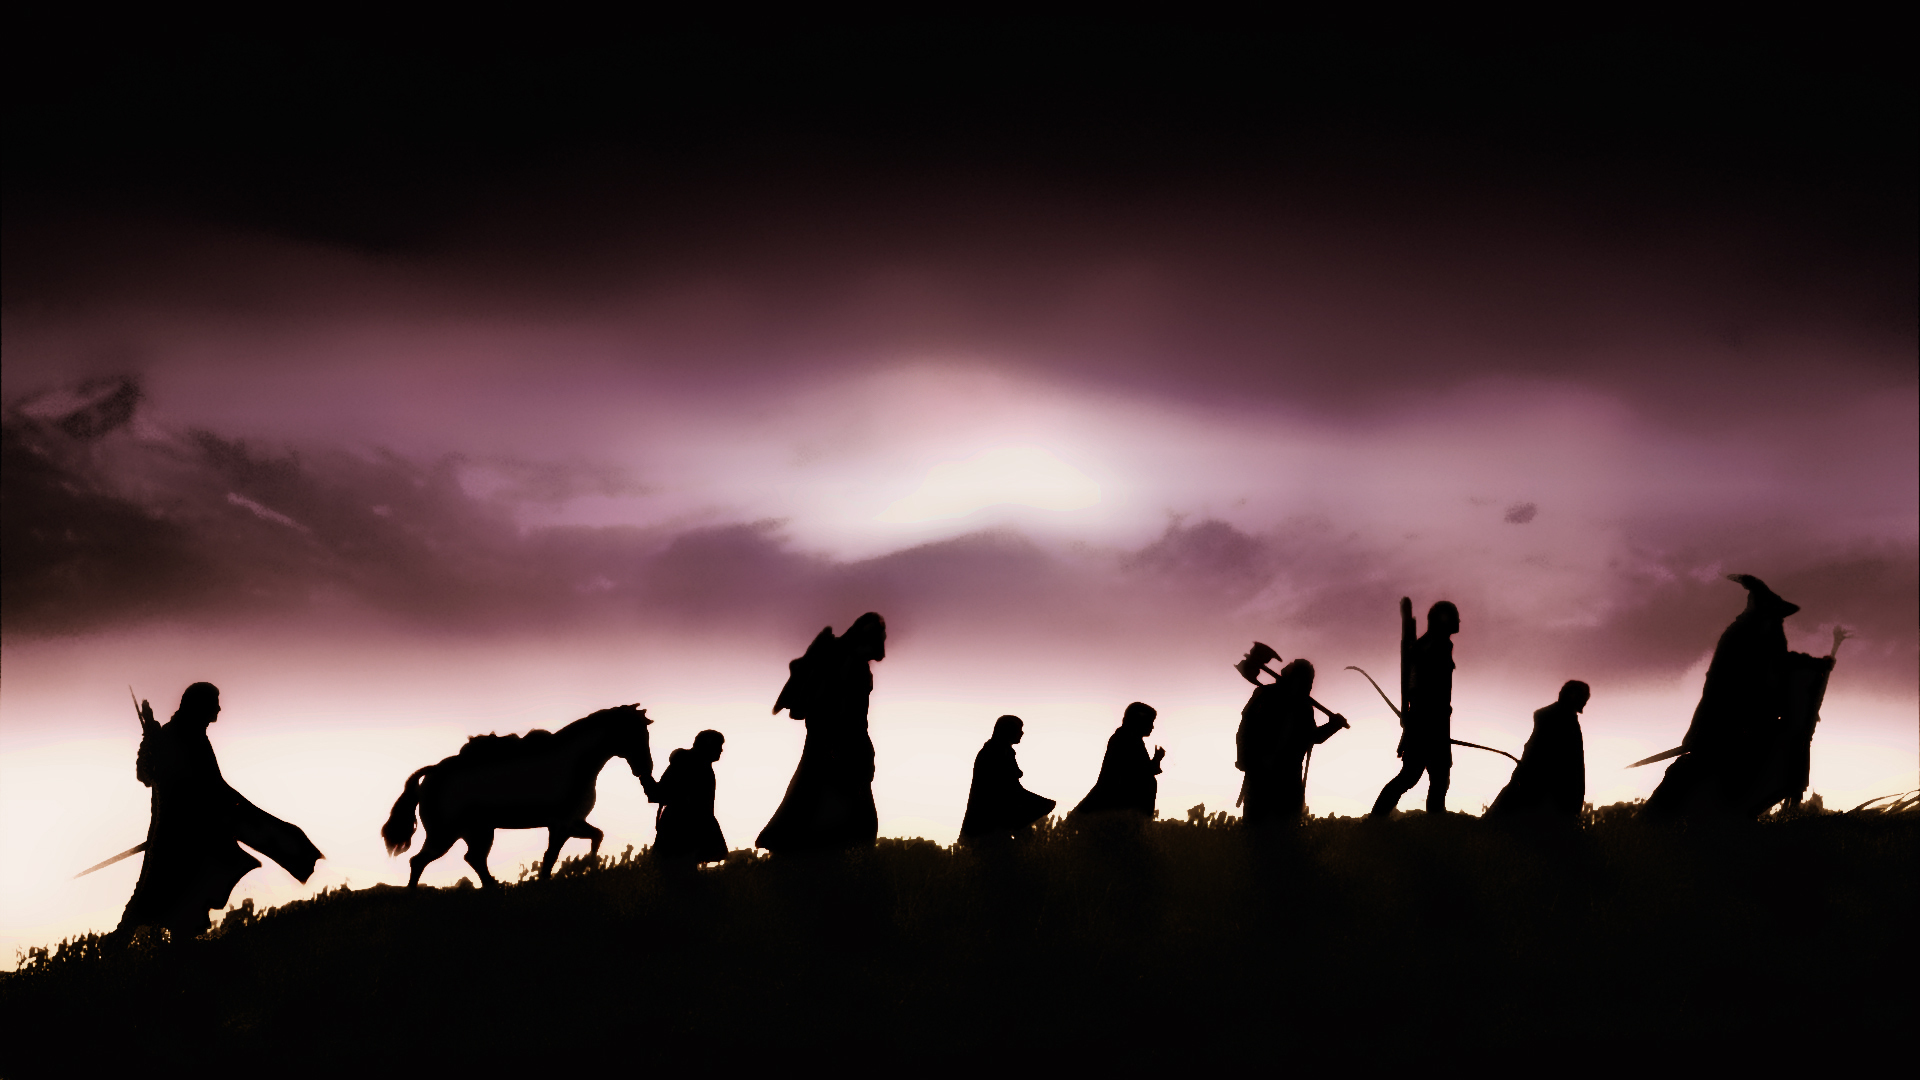 The Fellowship of the Ring — The Lord of the Rings Series